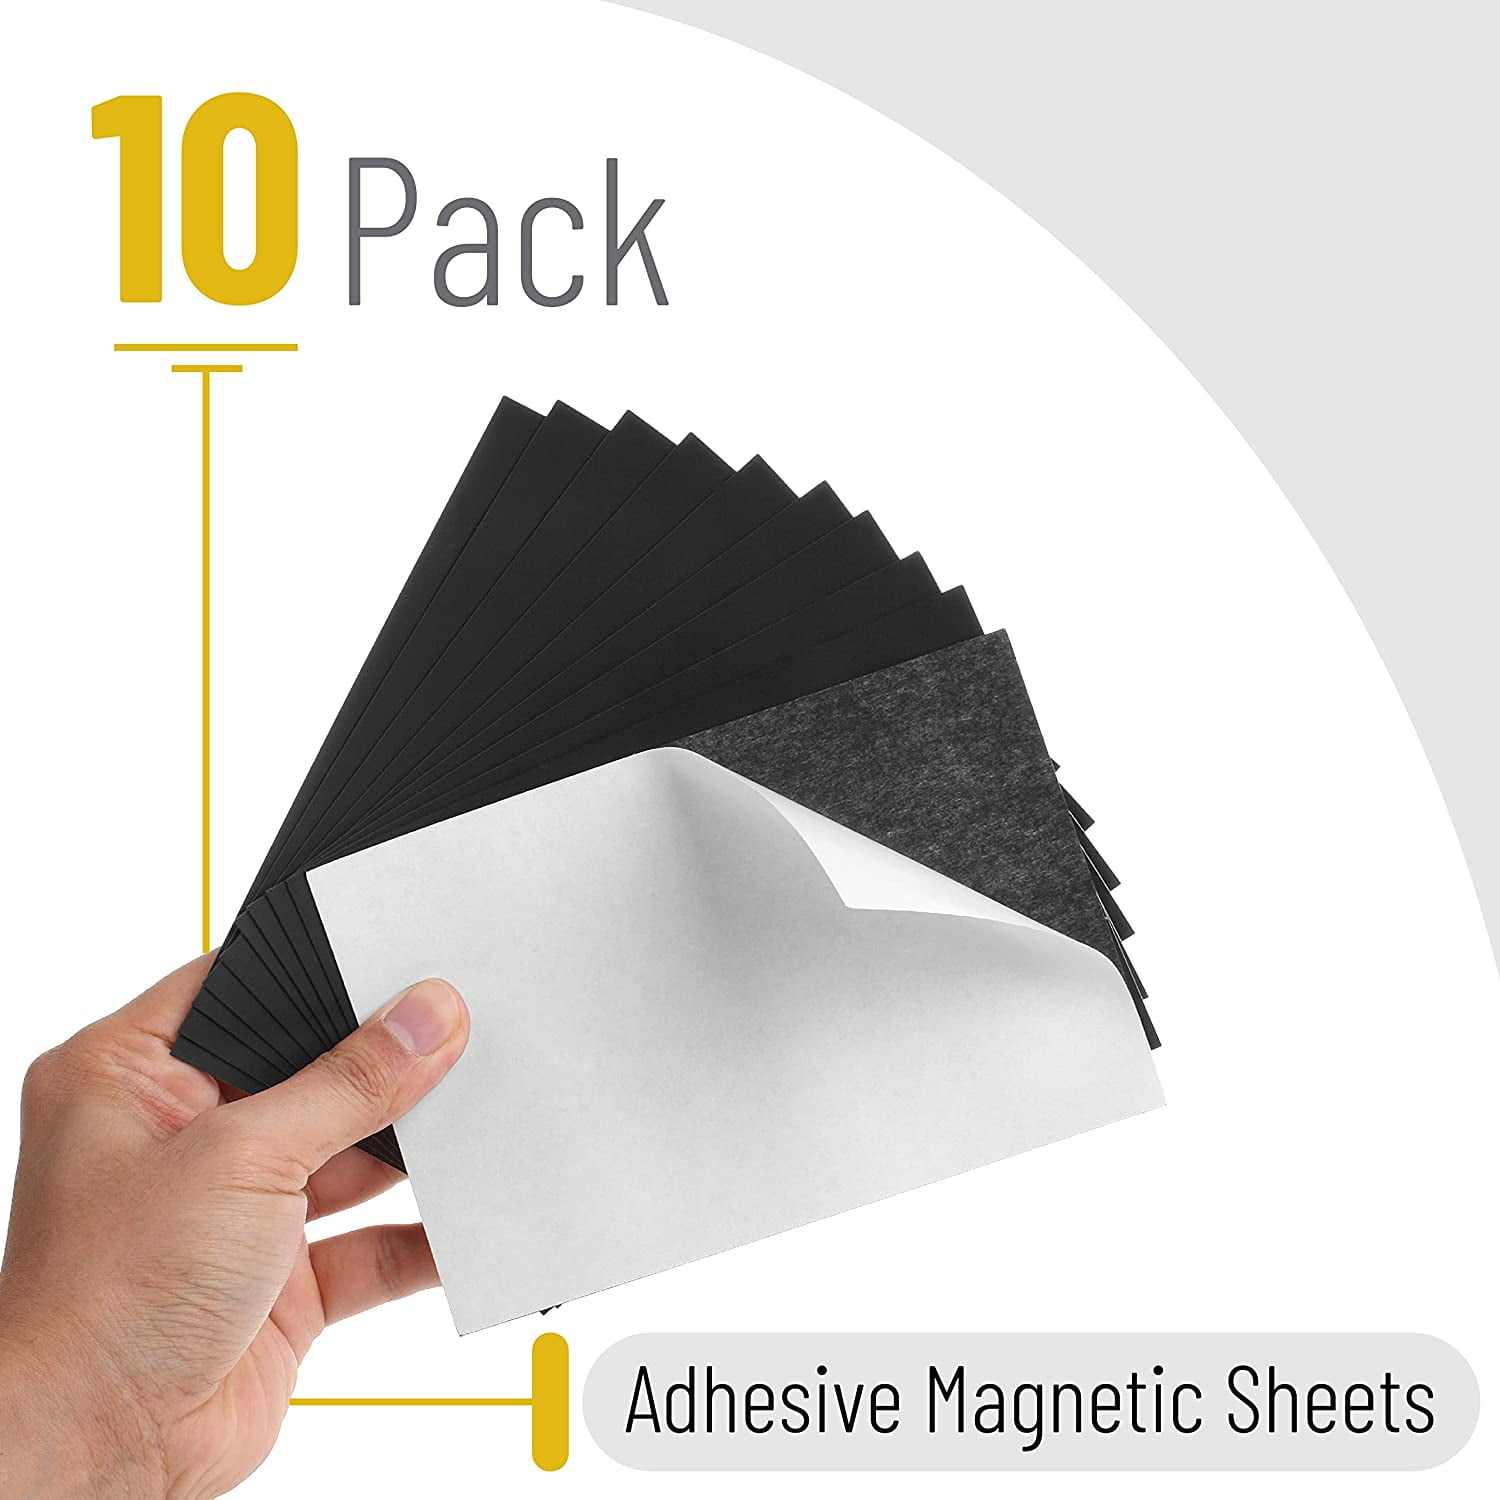 Magnetic Adhesive Sheets,, 2 X 3.5, 45 Pack，Cuttable Magnetic Sheets with  Adhes